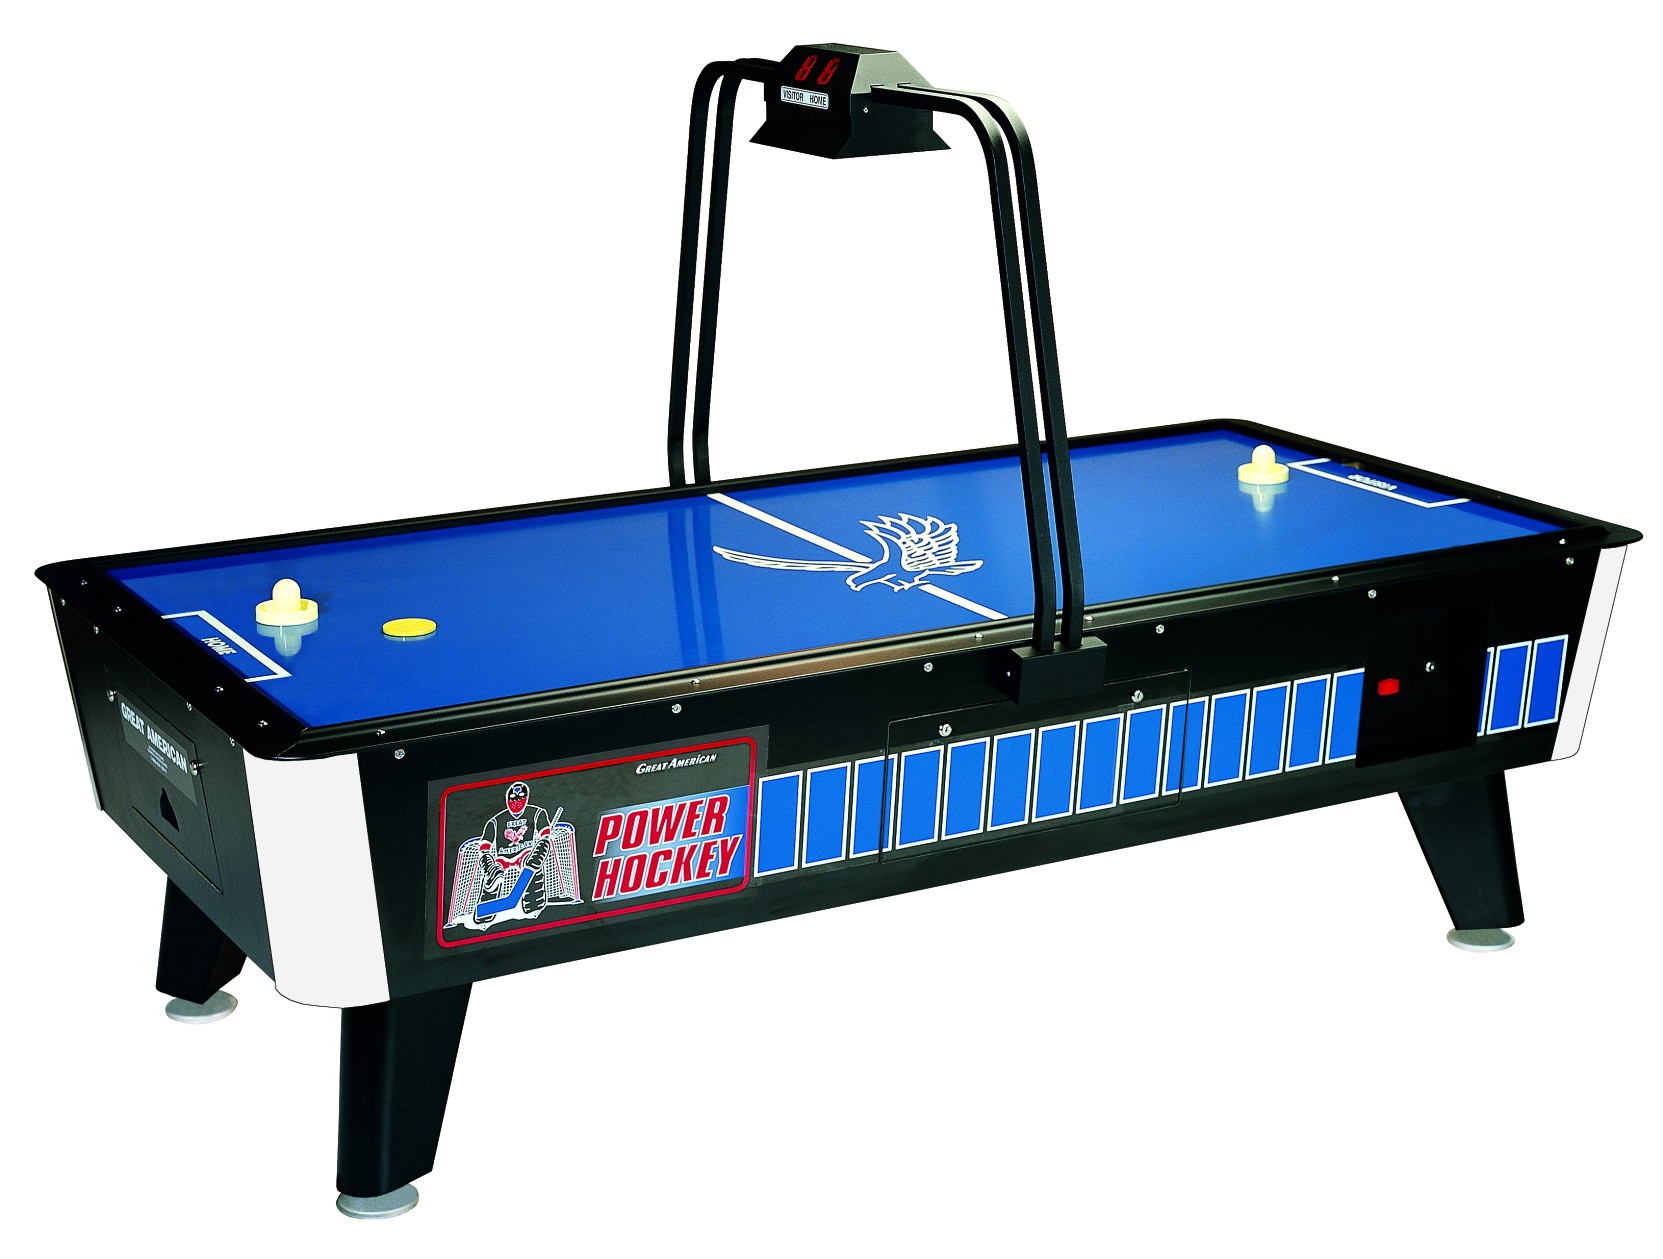 Table Air Hockey 8' avec pointage électronique - Power hockey